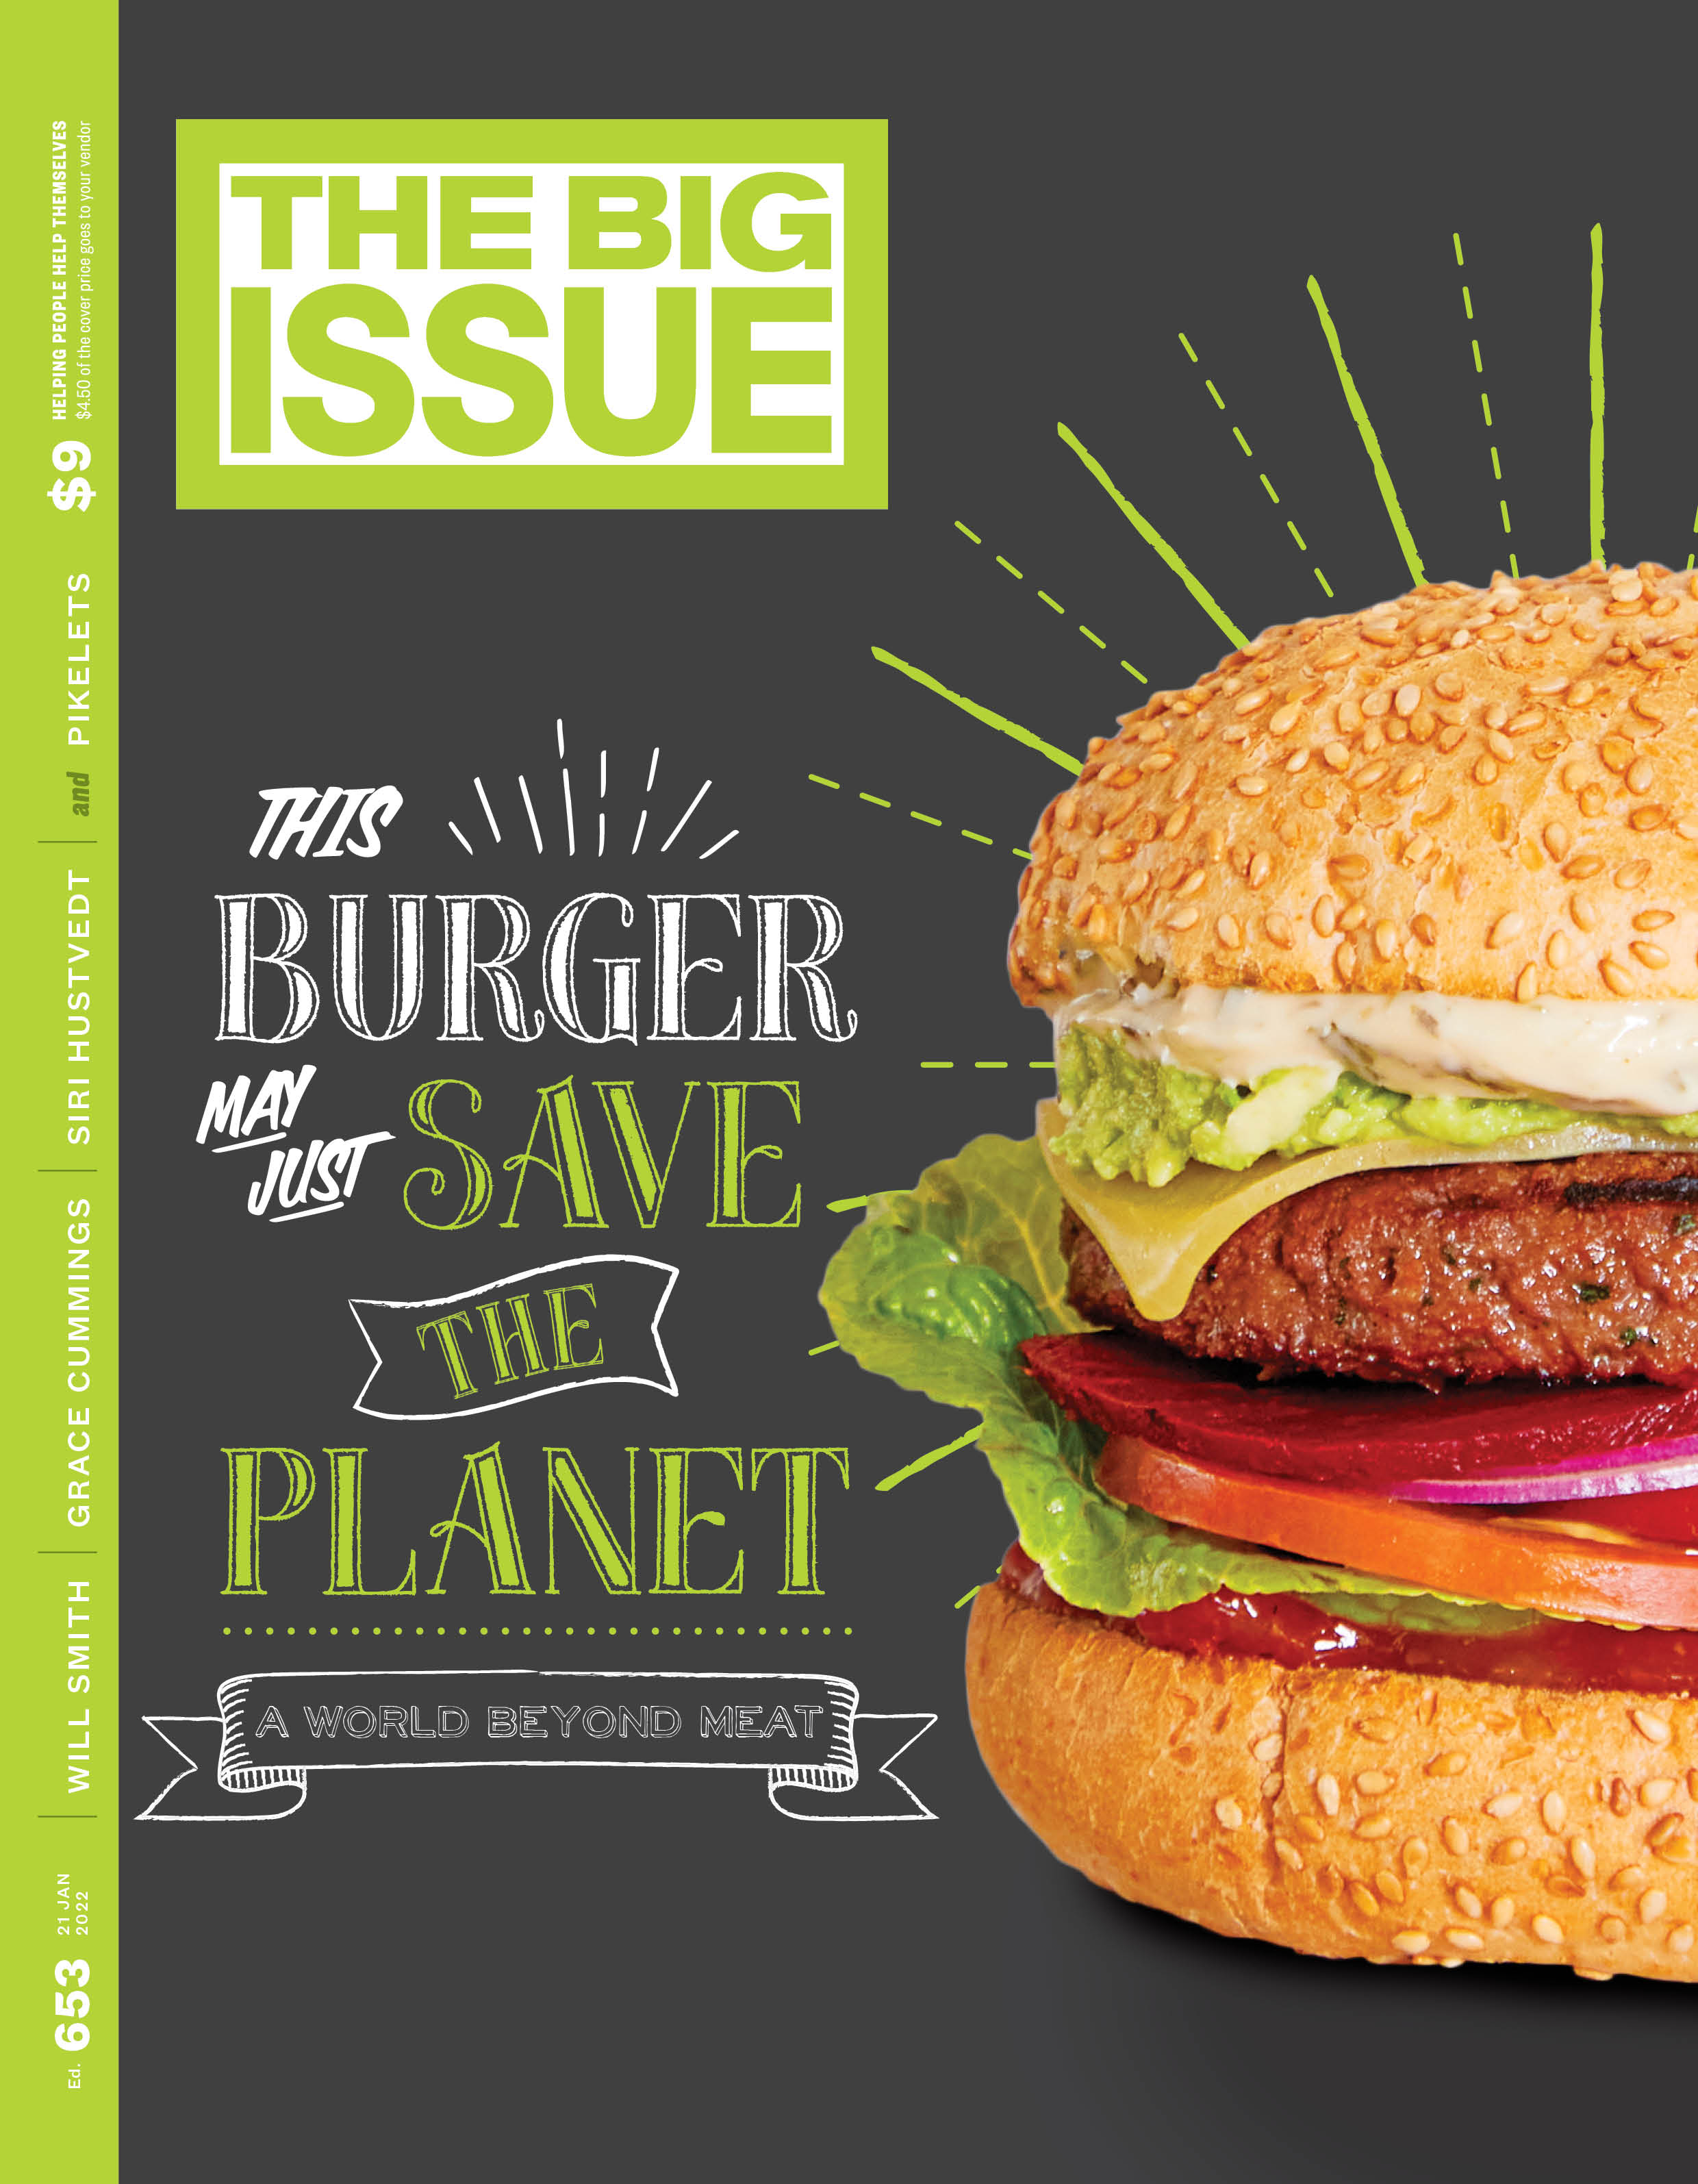 Our latest cover, featuring a delicious looking burger. Text: This burger may just save the planet. A world beyond meat.